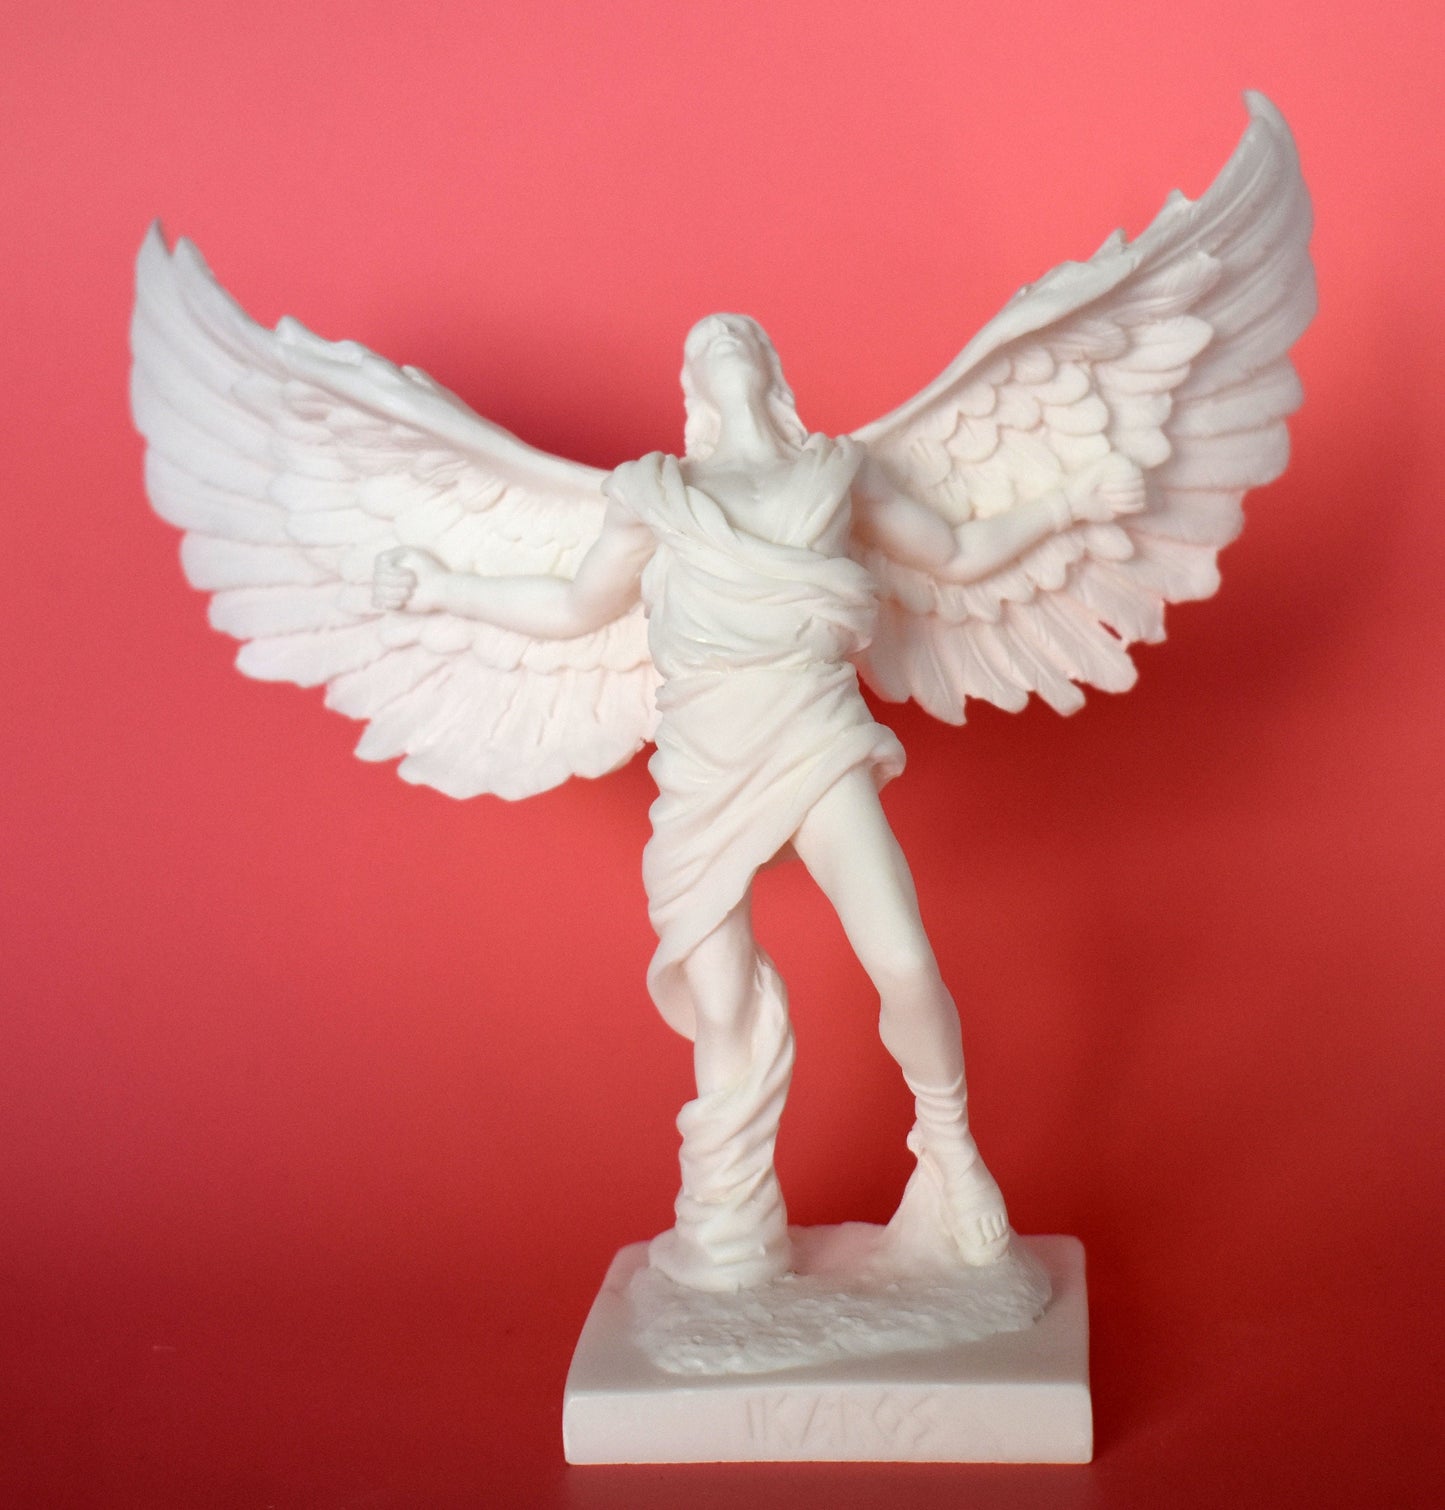 Icarus - Son of Daedalus - Escape from Crete with Wings from Wax and Drowned - Don't Fly Too Close to the Sun -  alabaster statue